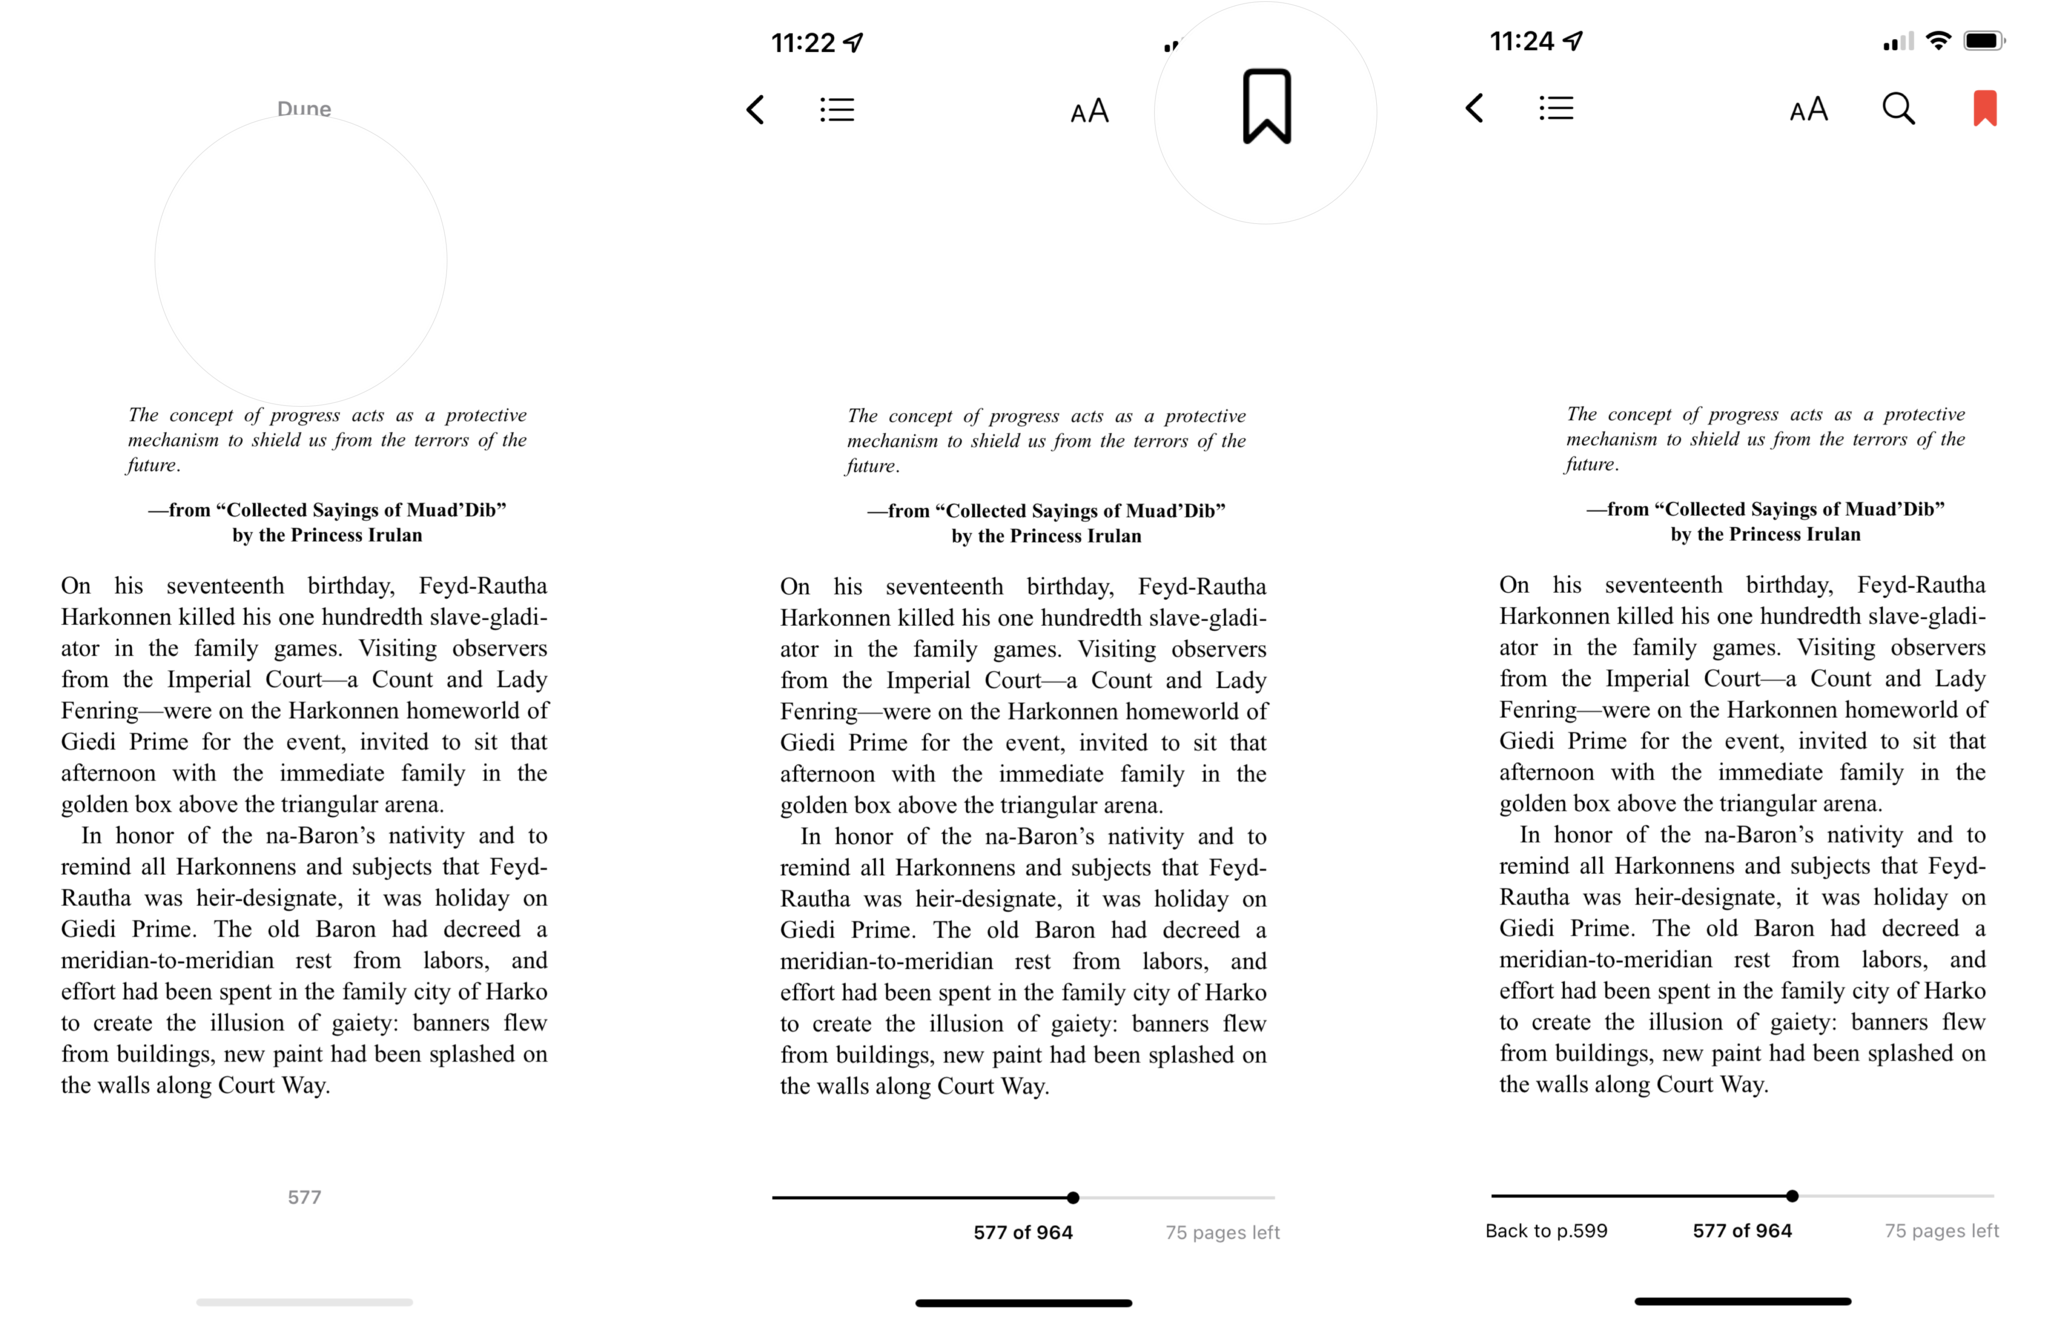 How to set a bookmark in Apple Books: tap a blank part of the page to bring up the controls, tap the Bookmark icon